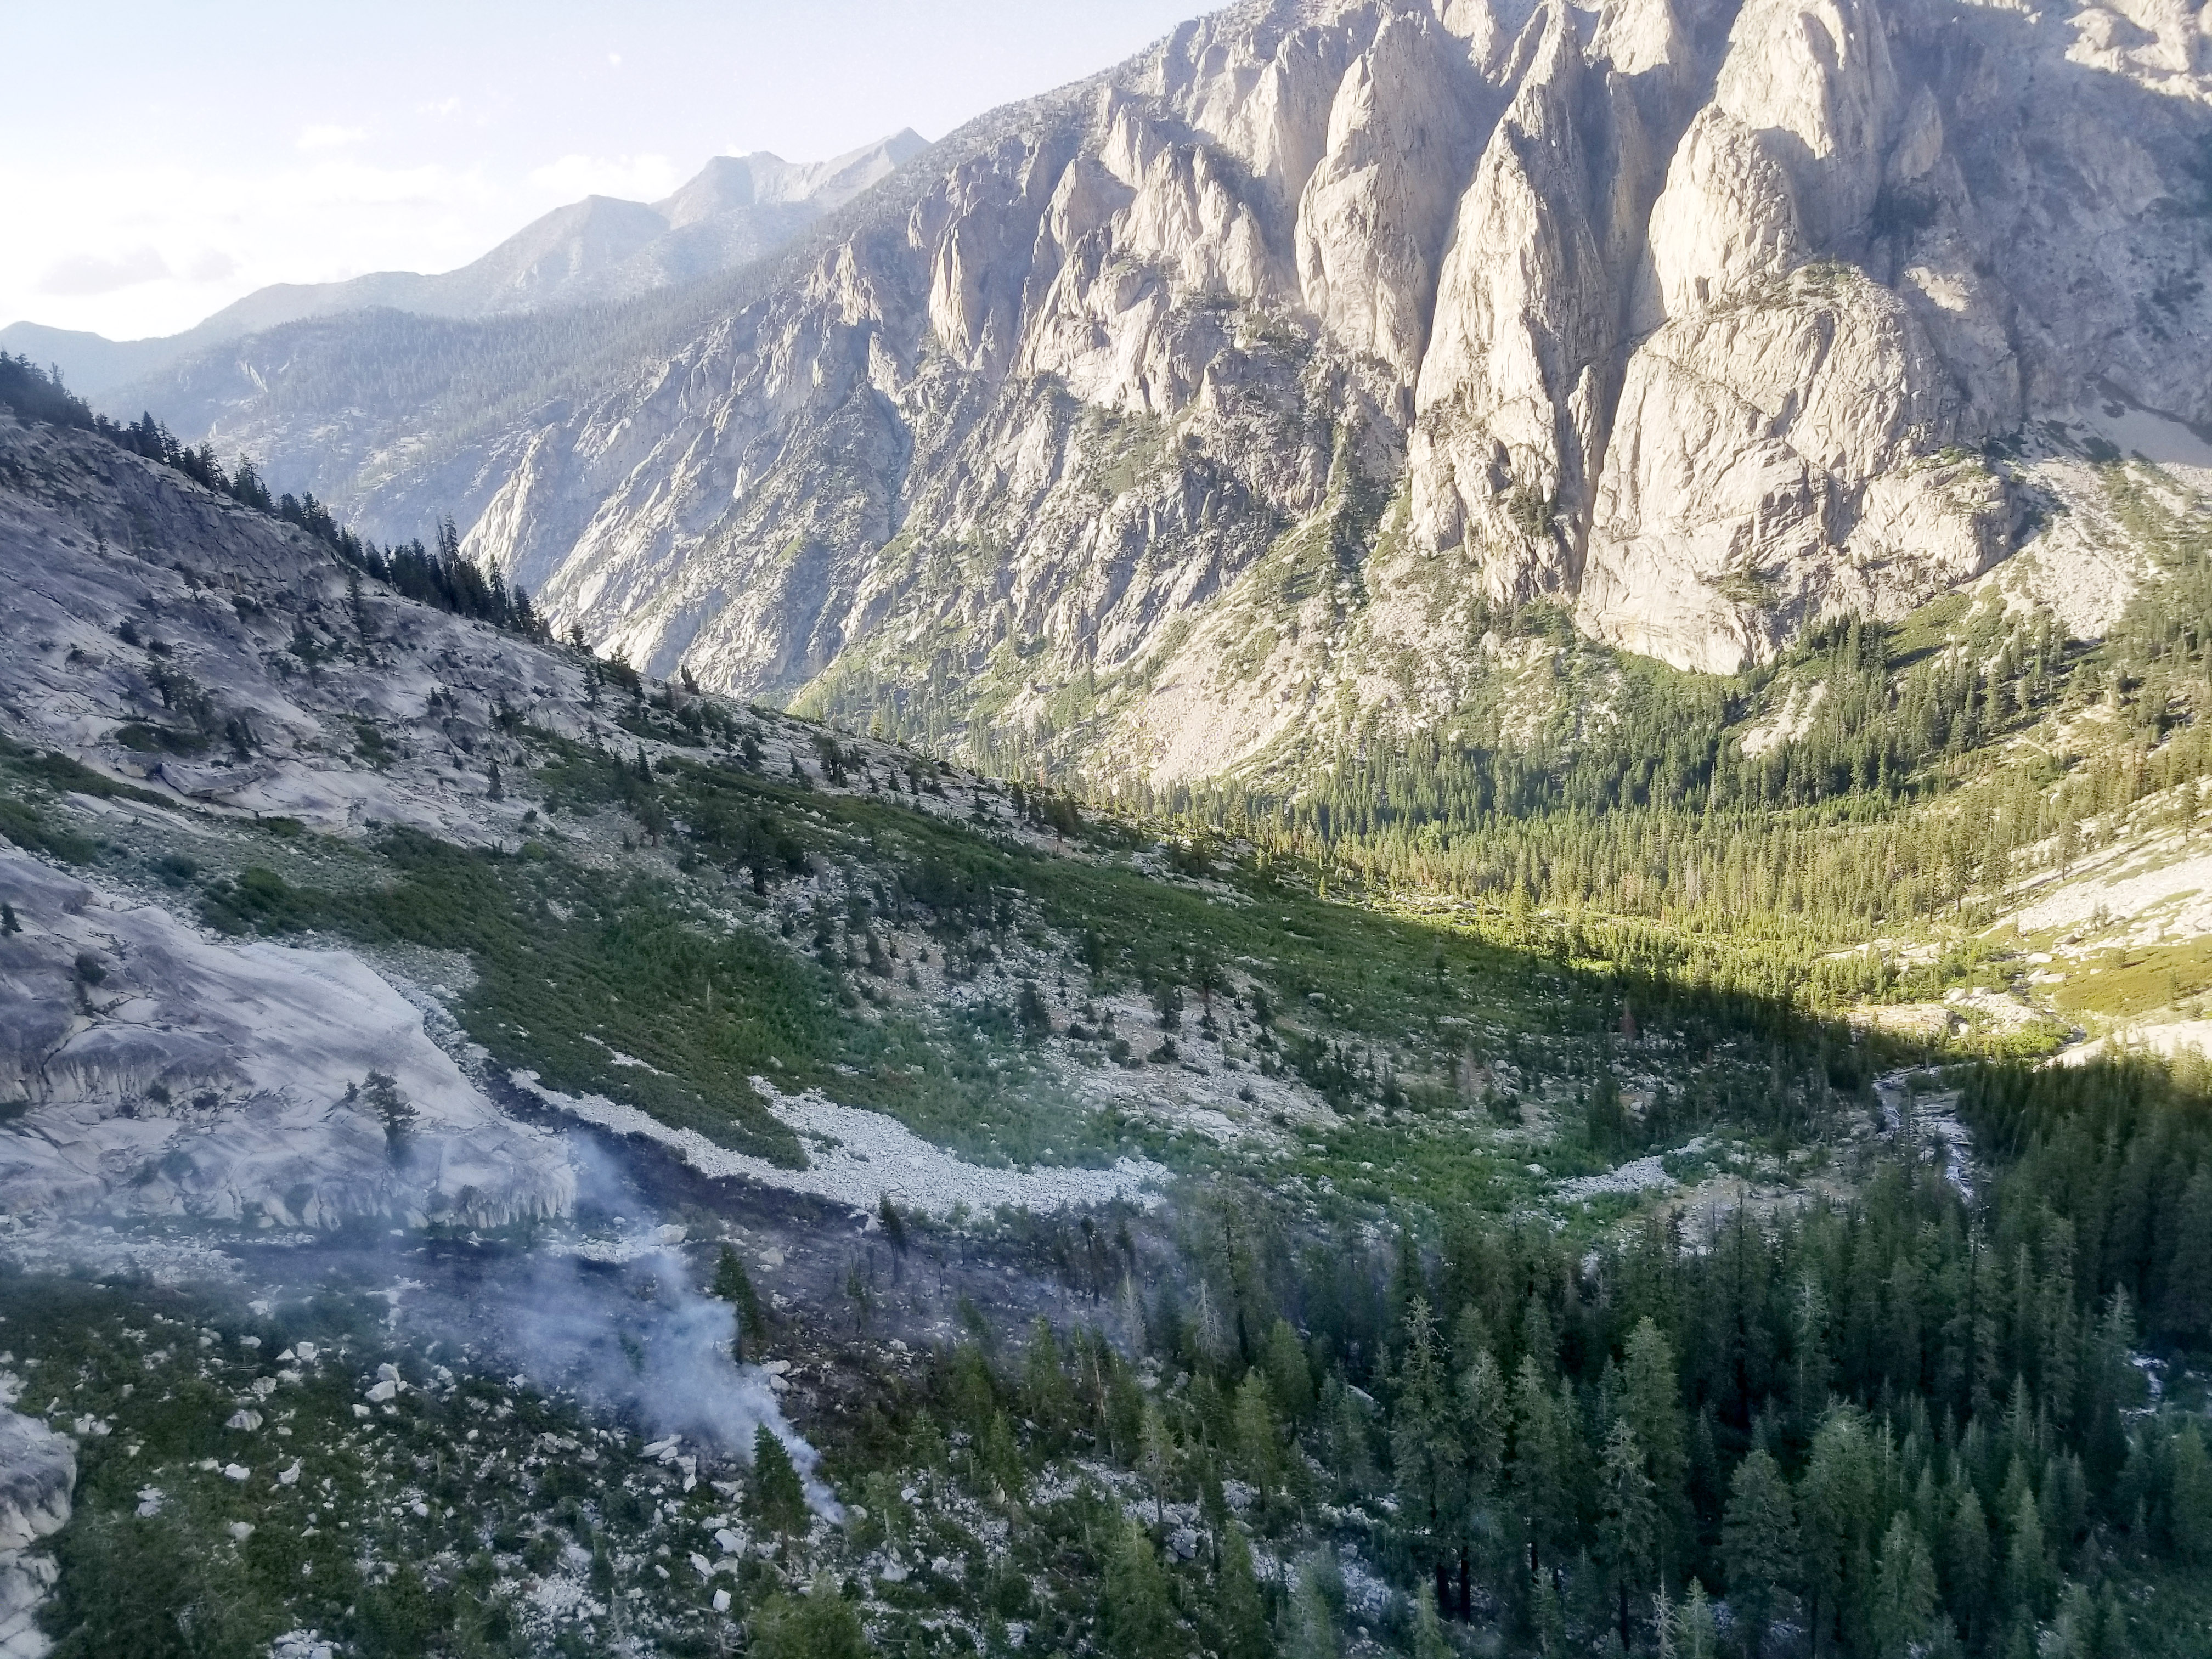 The East Creek Fire as seen from the Sequoia and Kings Canyon National Parks' fire helicopter. The view is looking north downhill towards Bubbs Creek.